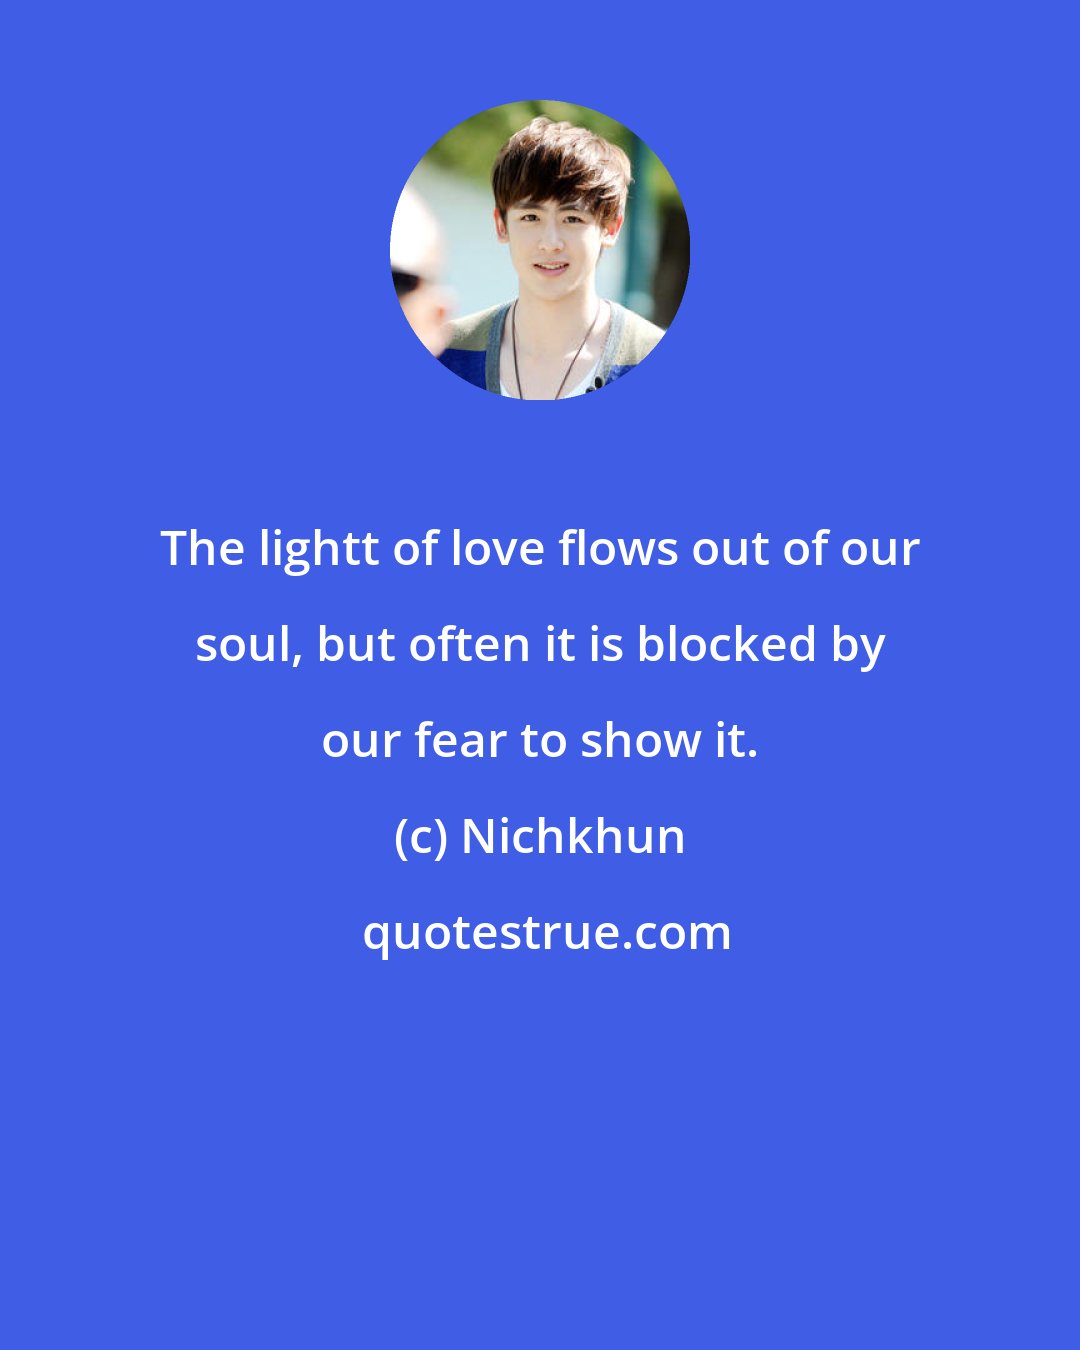 Nichkhun: The lightt of love flows out of our soul, but often it is blocked by our fear to show it.